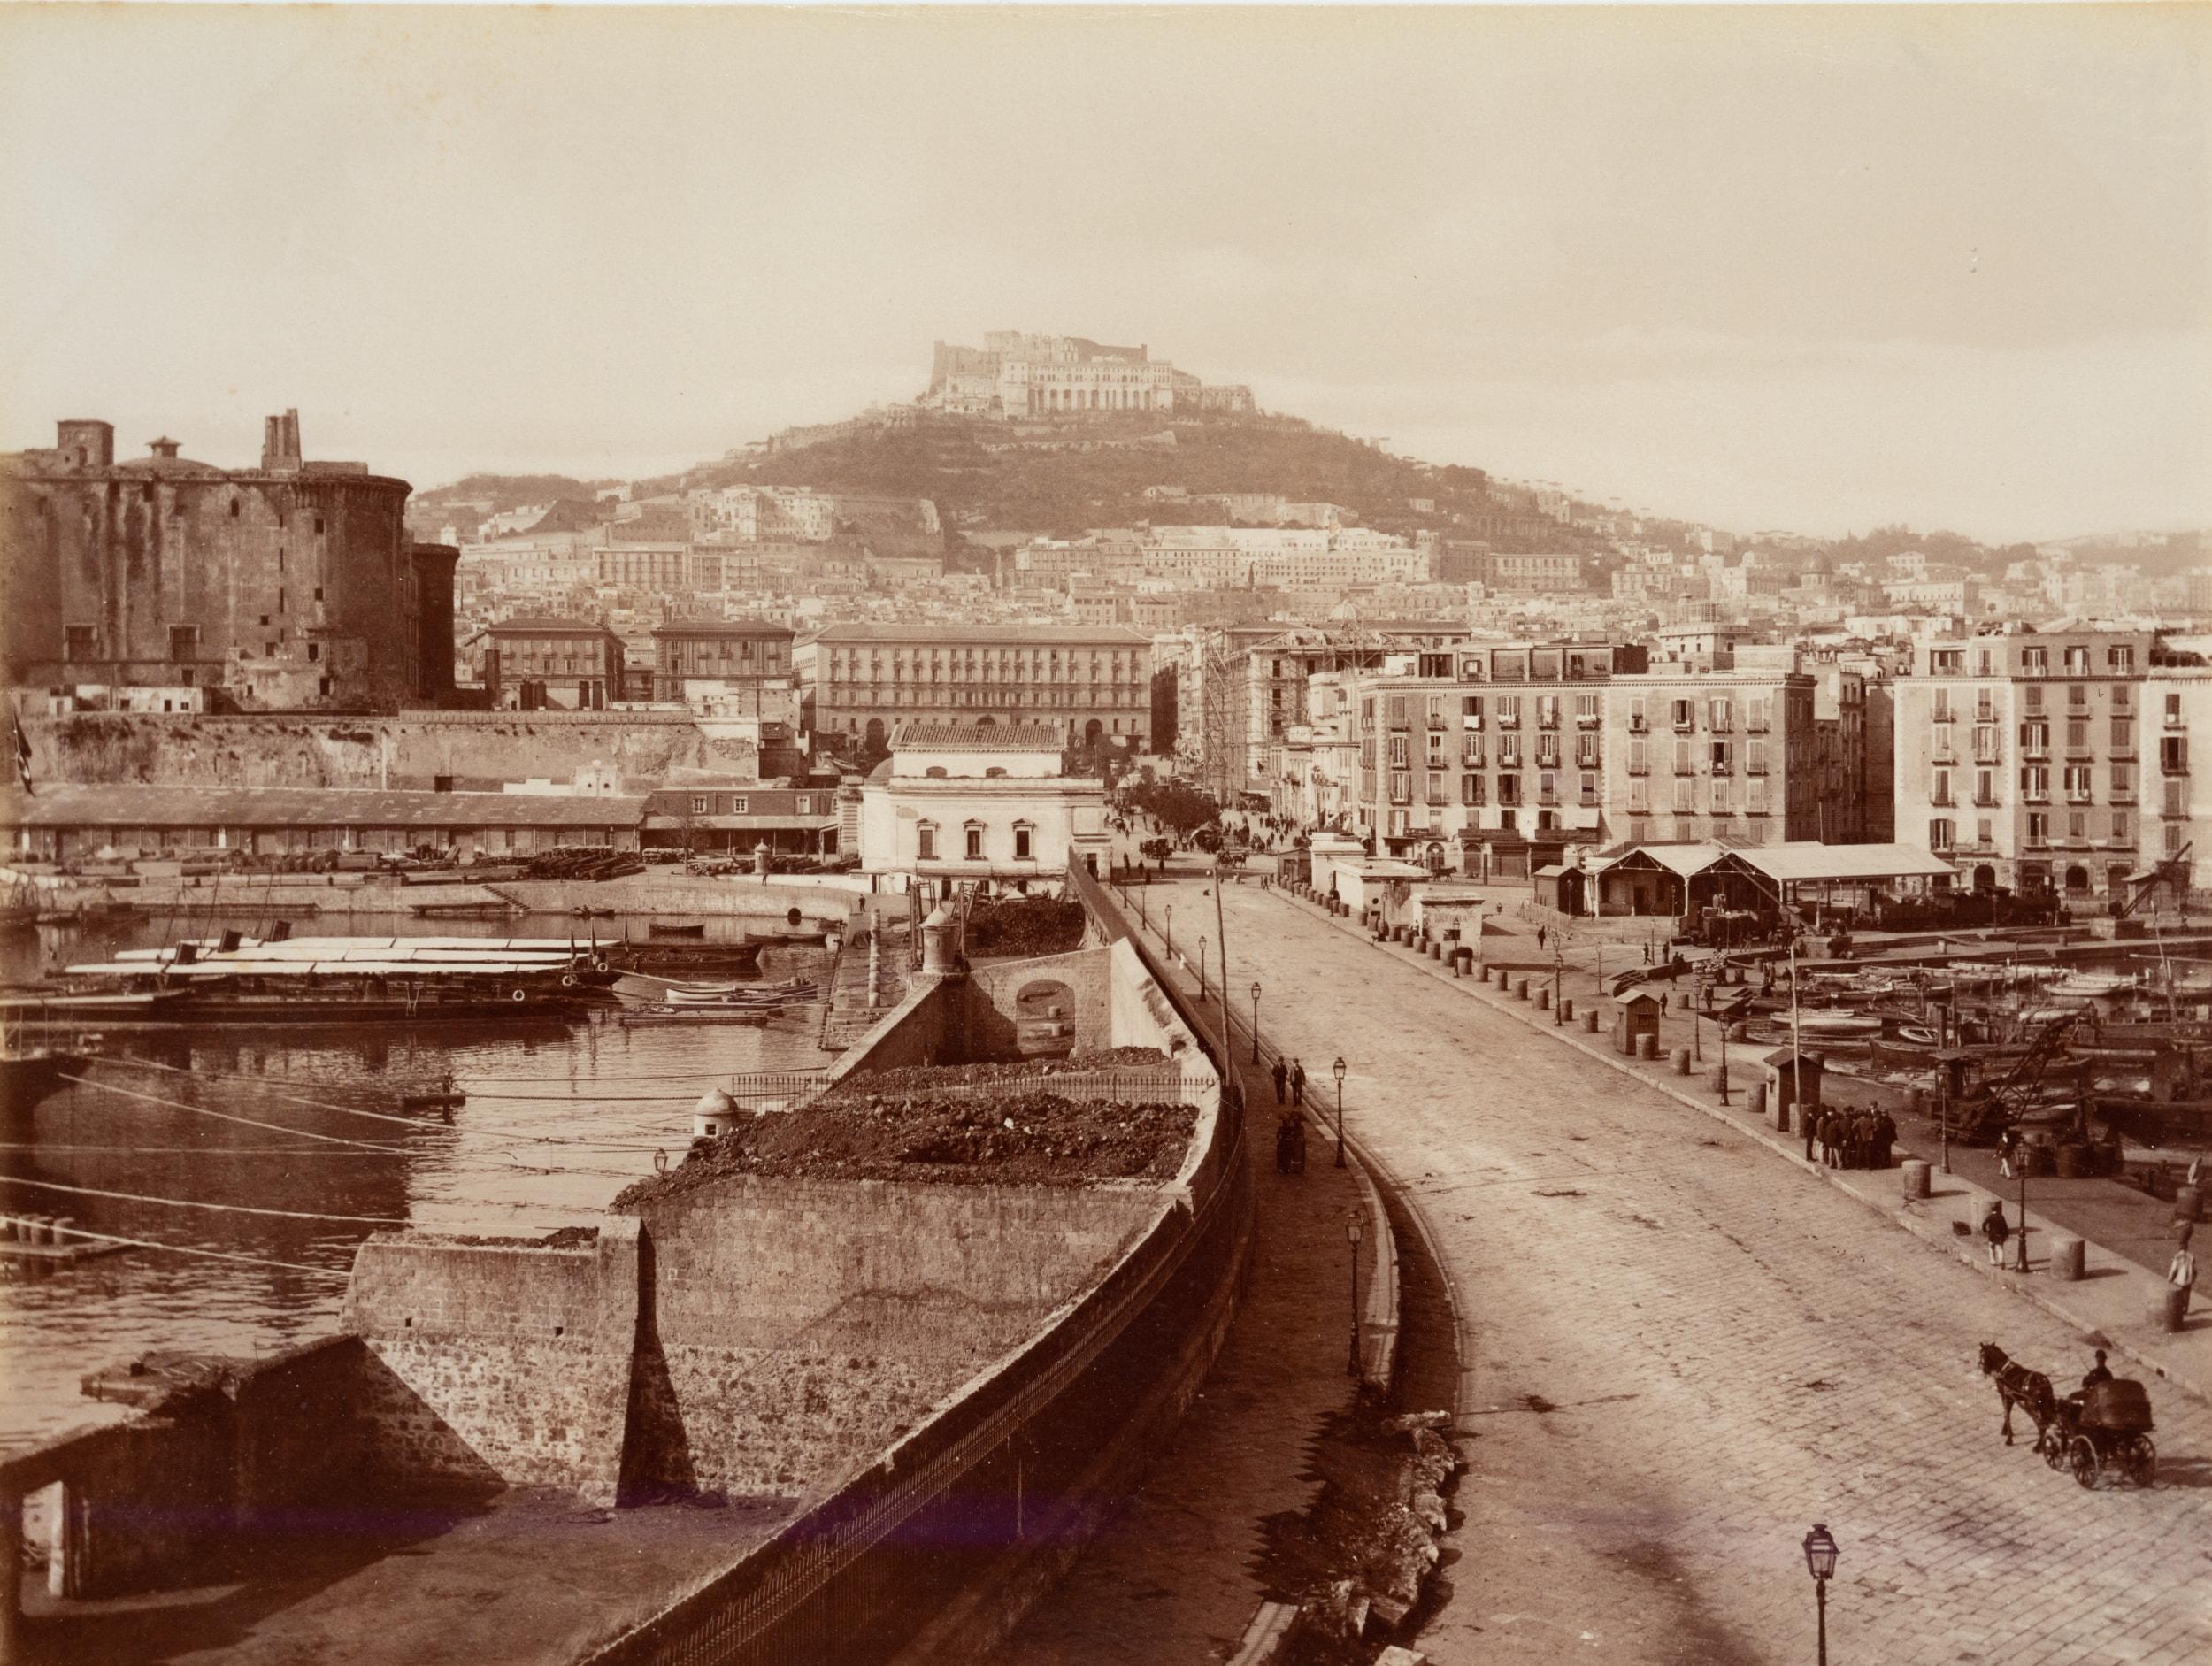 Fratelli Alinari Landscape Photograph - Naples with a view of the harbour and Castel Nuovo